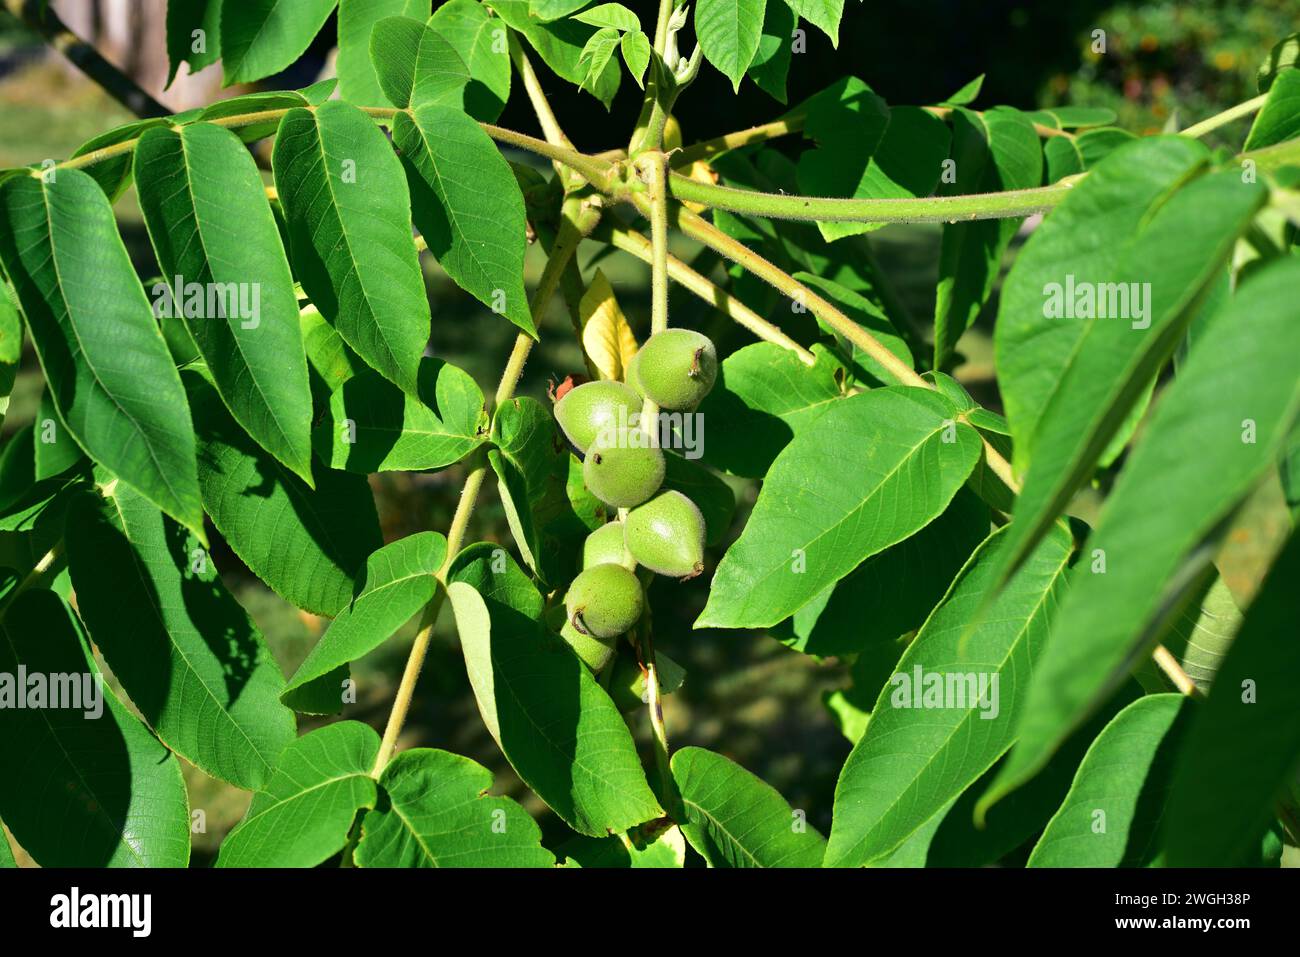 Butternut or white walnut (Juglans cinerea) is a deciduous tree native to northeastern USA and southeastern Canada. Fruits detail. Stock Photo